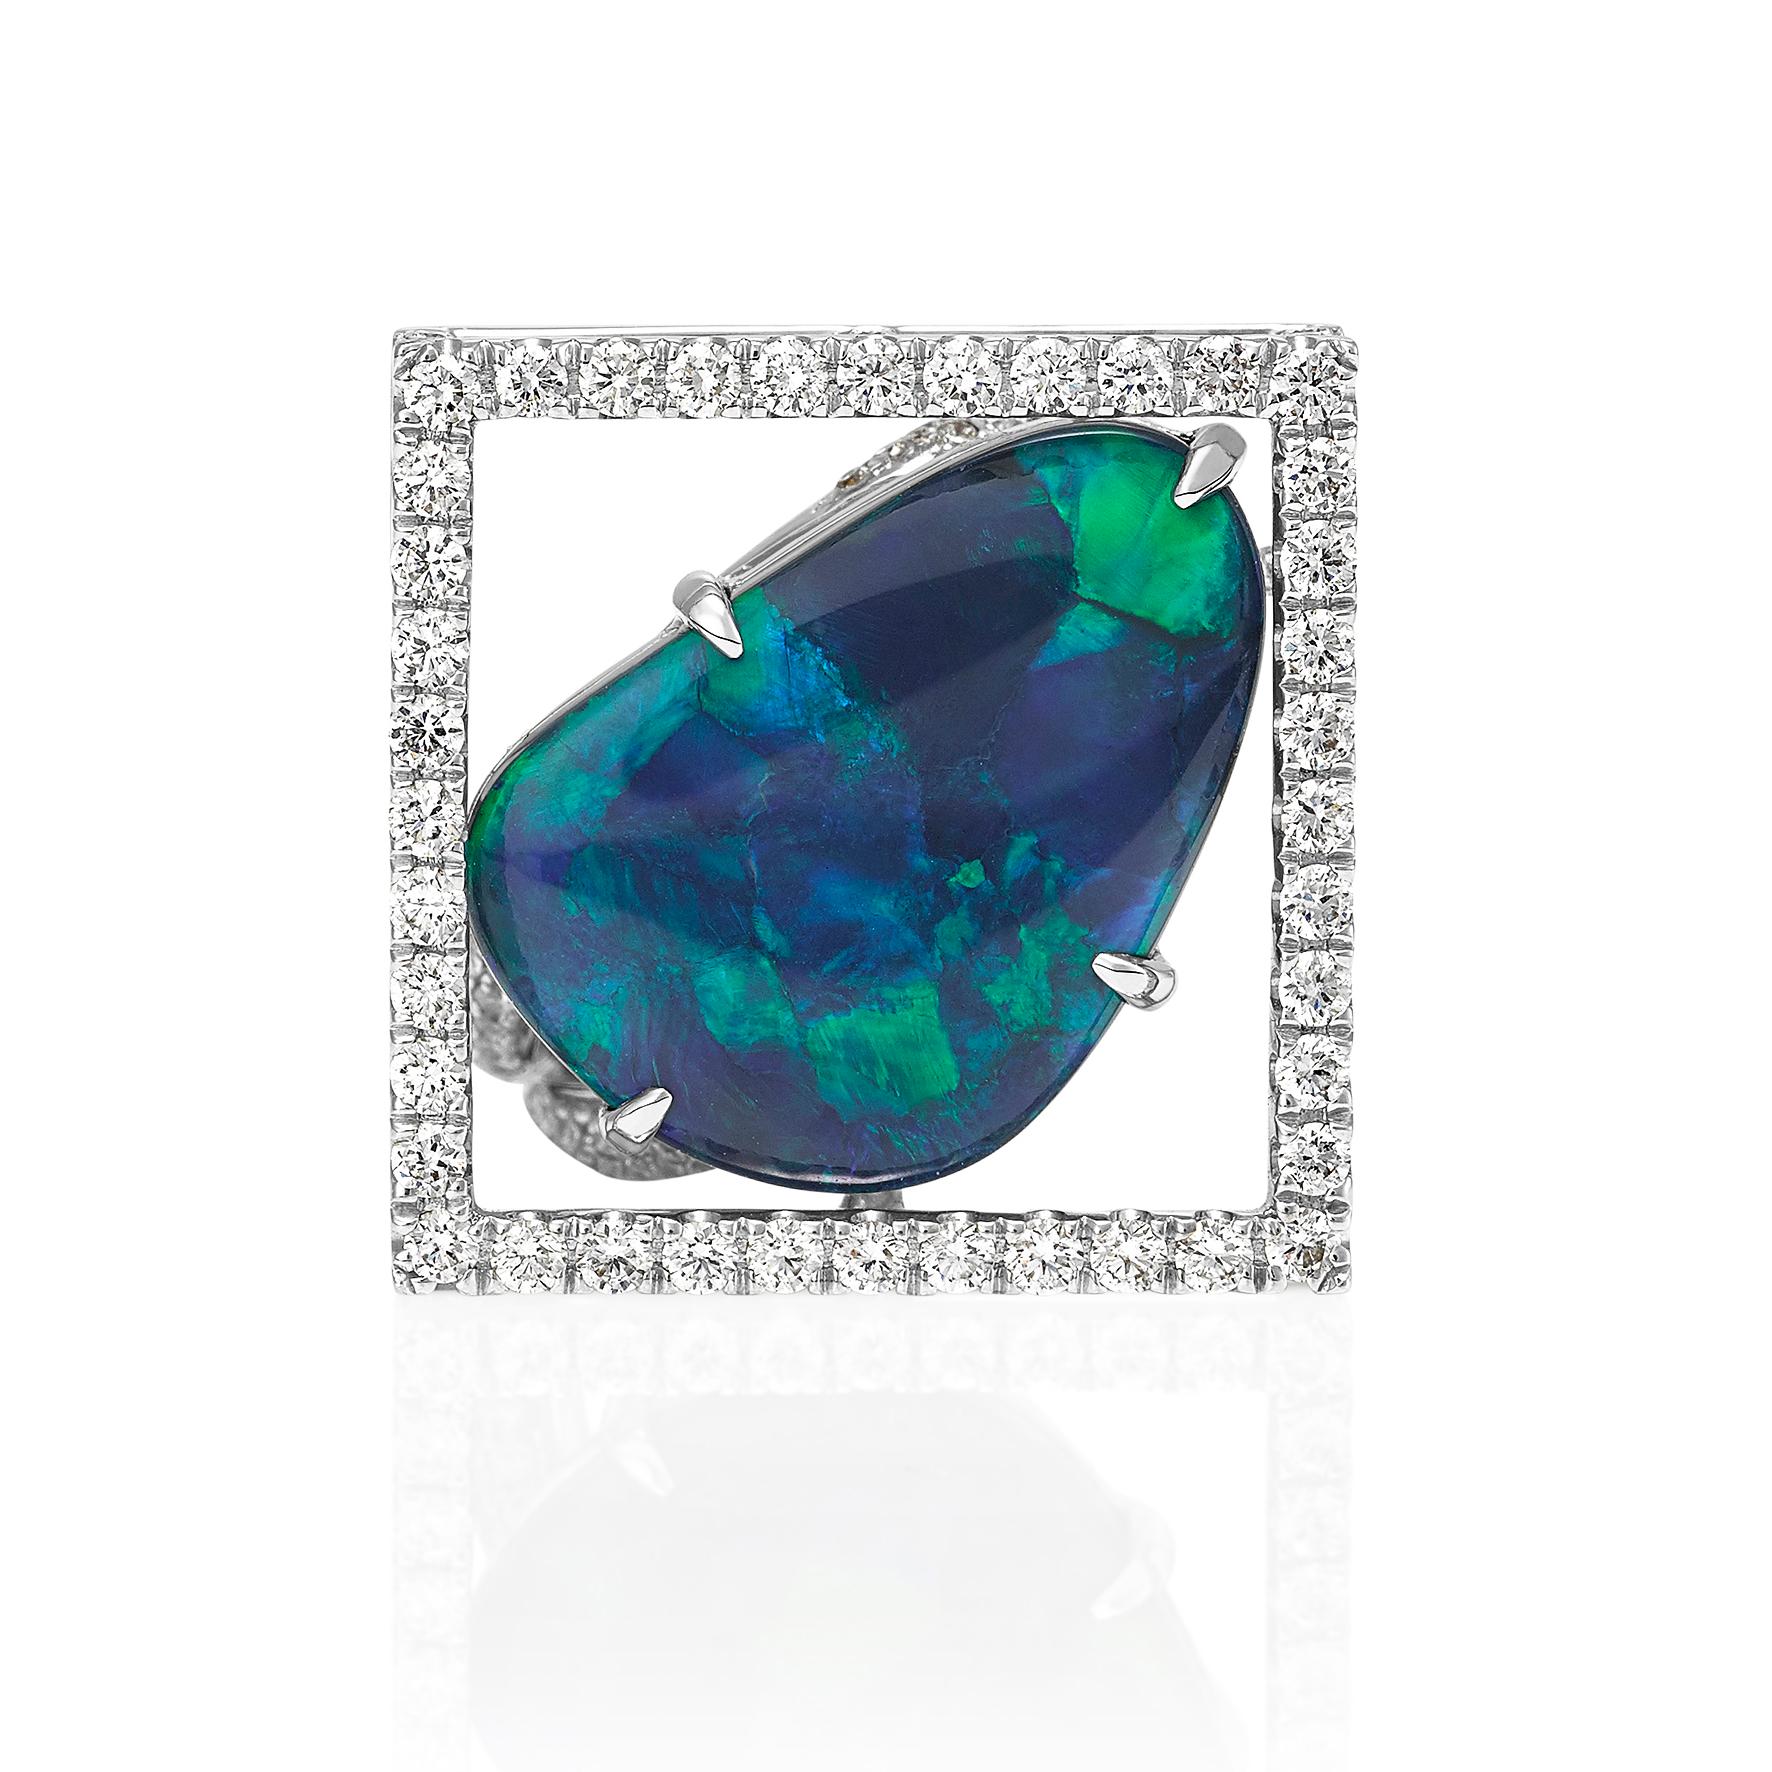 Giulians contemporary 18 karat Australian Black Opal Ring.  This cocktail ring showcases a 7.88ct natural solid black opal, from Lightning Ridge, NSW, with blue and green play-of-color.  The opal has been prong set  in a handcrafted 18 karat white